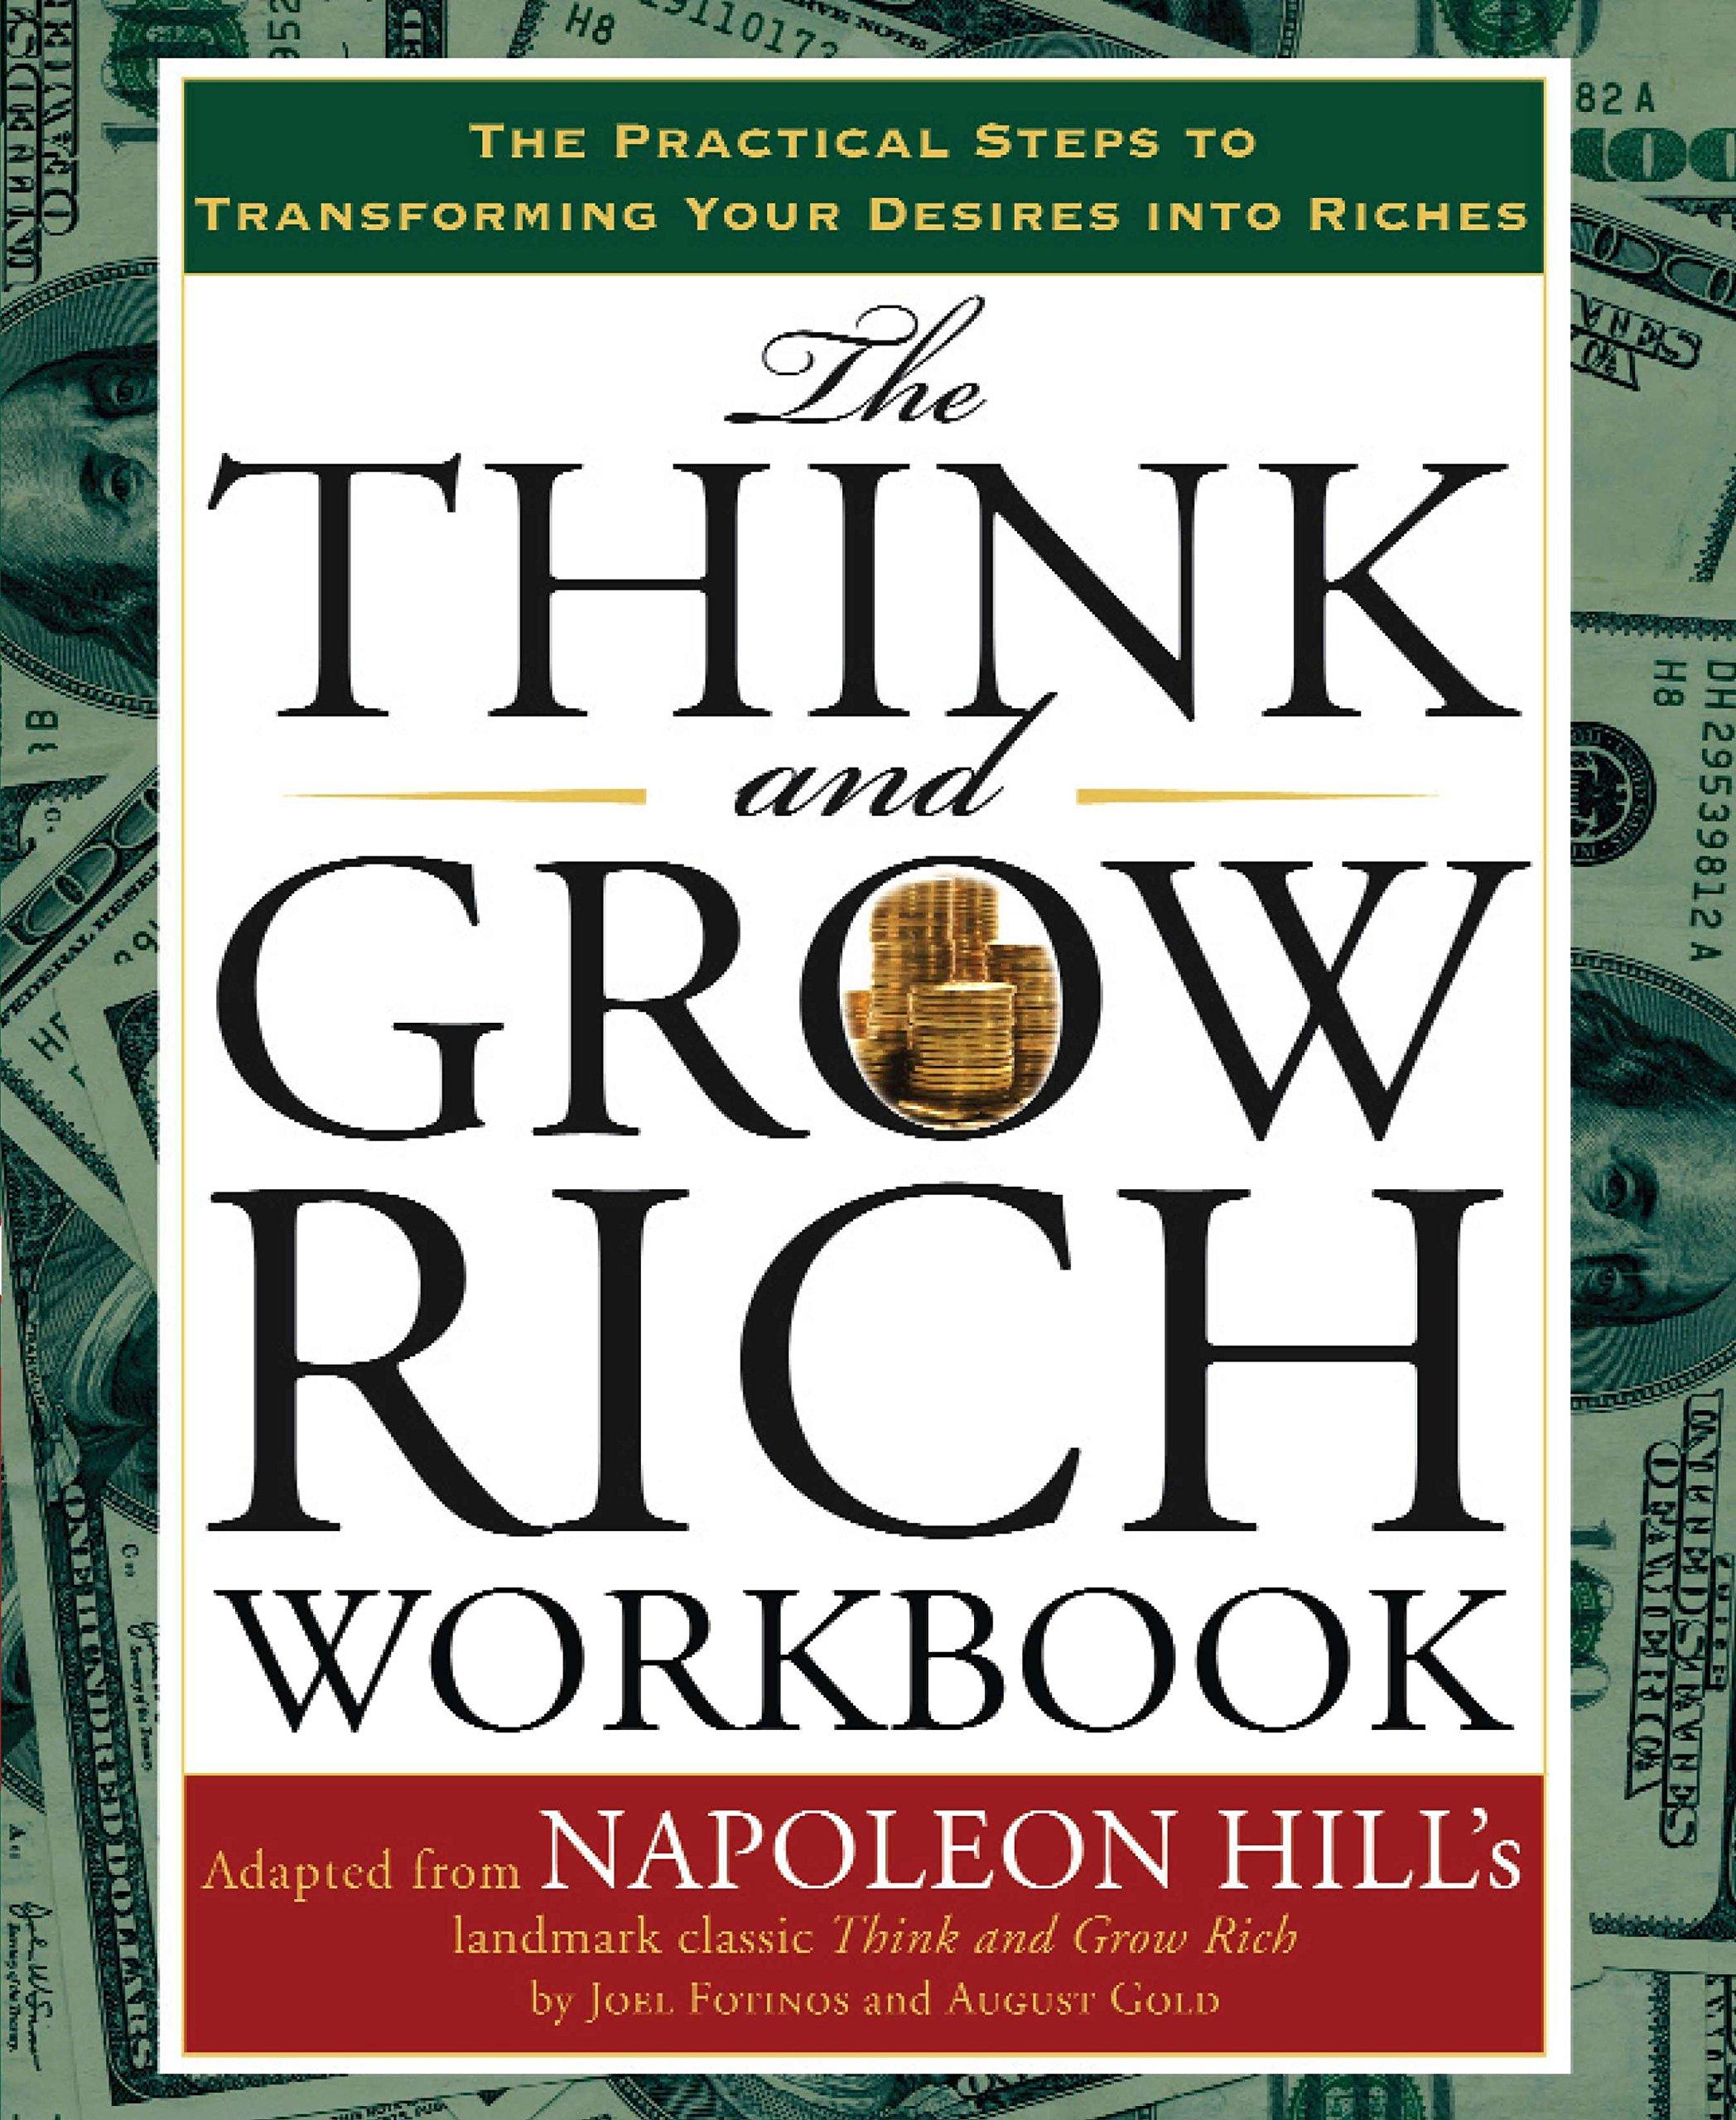 The Think And Grow Rich Workbook The Practical Steps To Transforming Your Desires Into Riches